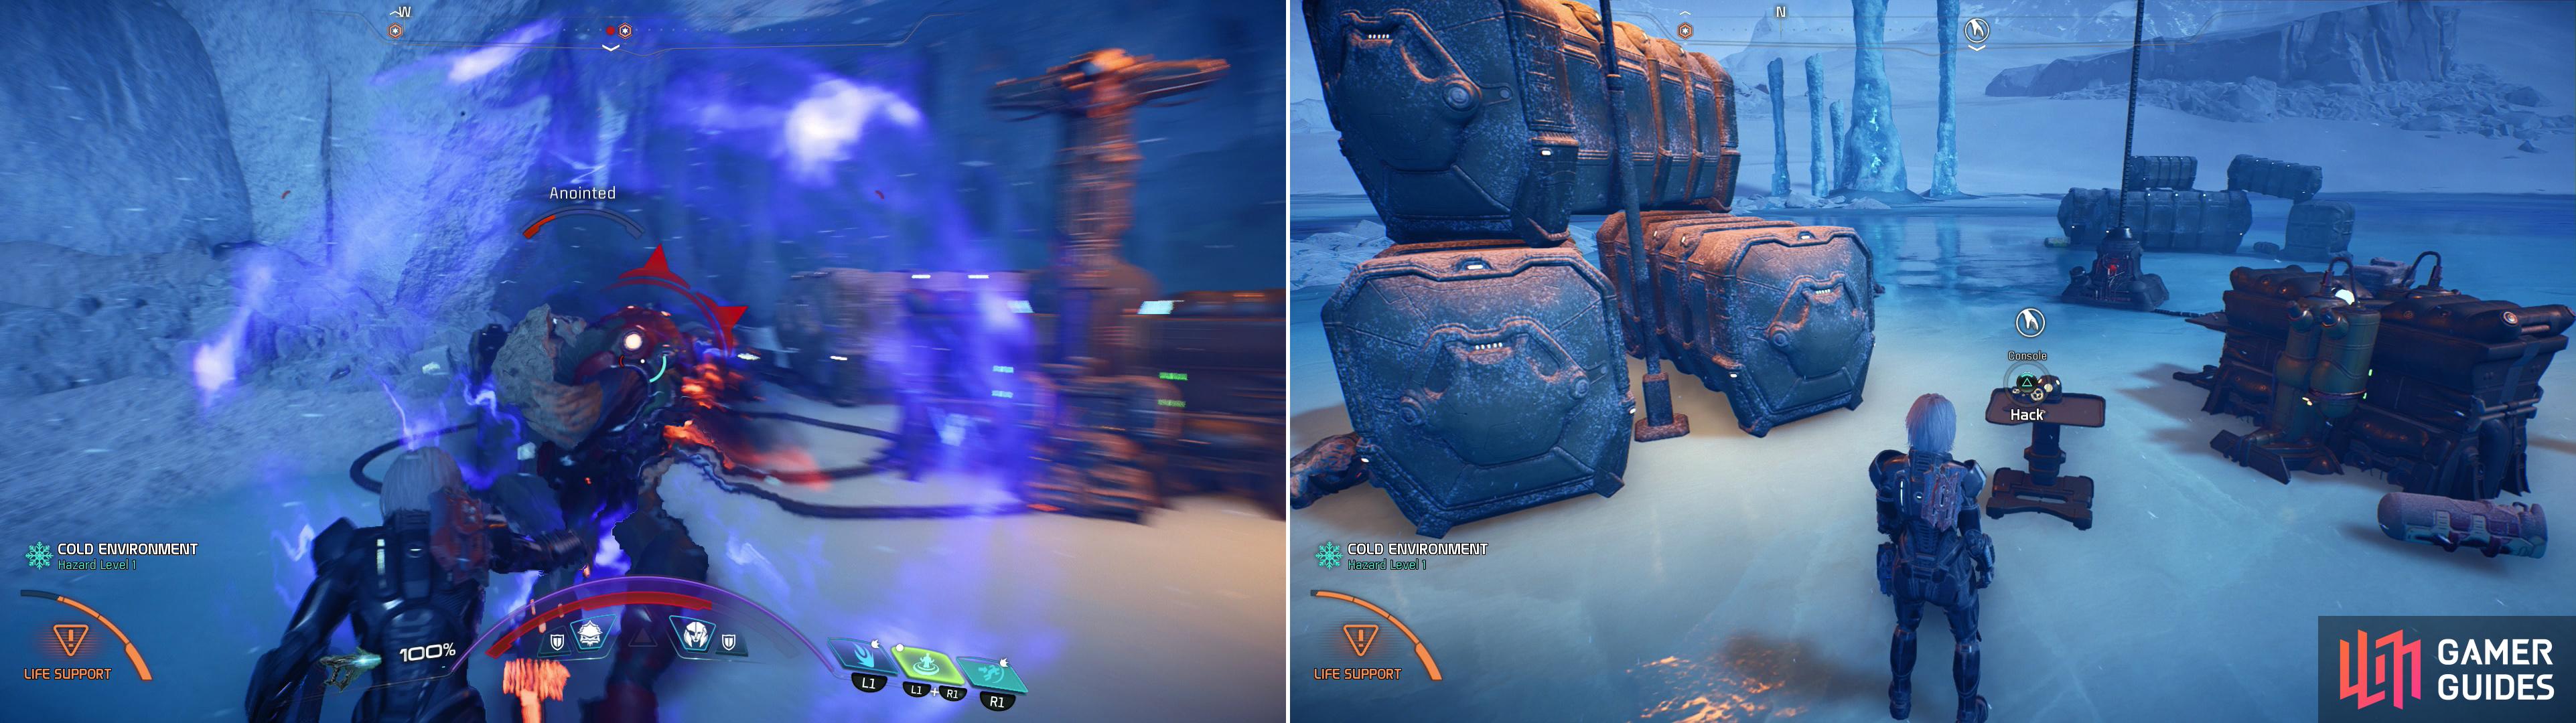 Clear out unmarked Kett camps (left) and search for randomly-spawning consoles (right) to start and advance this quest.